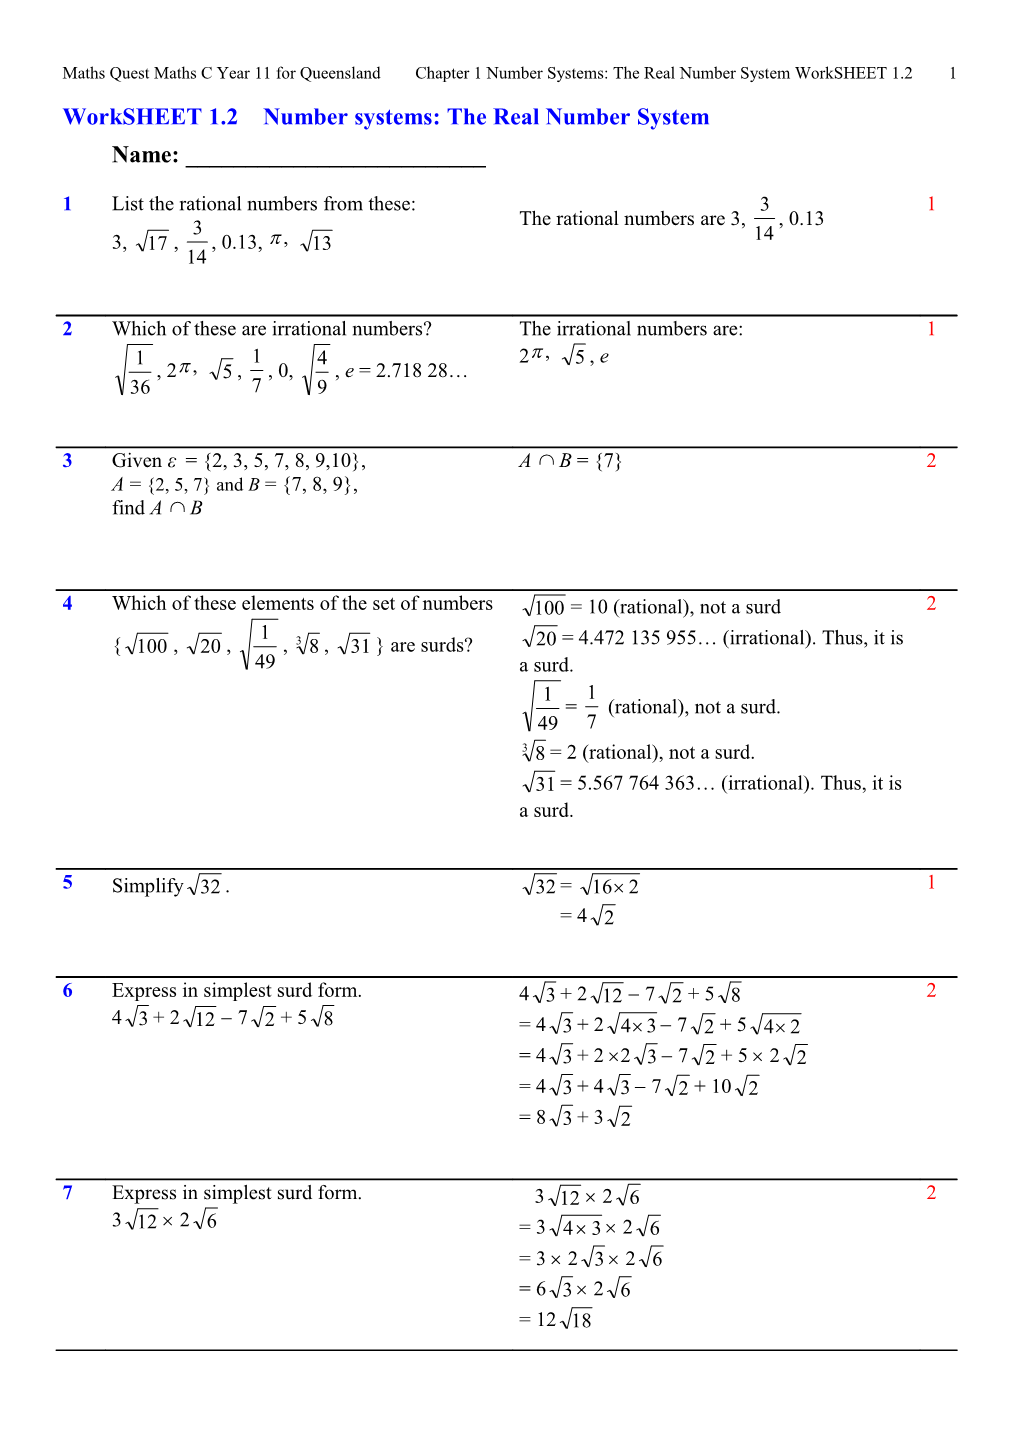 Worksheet 1.2Number Systems: the Real Number System